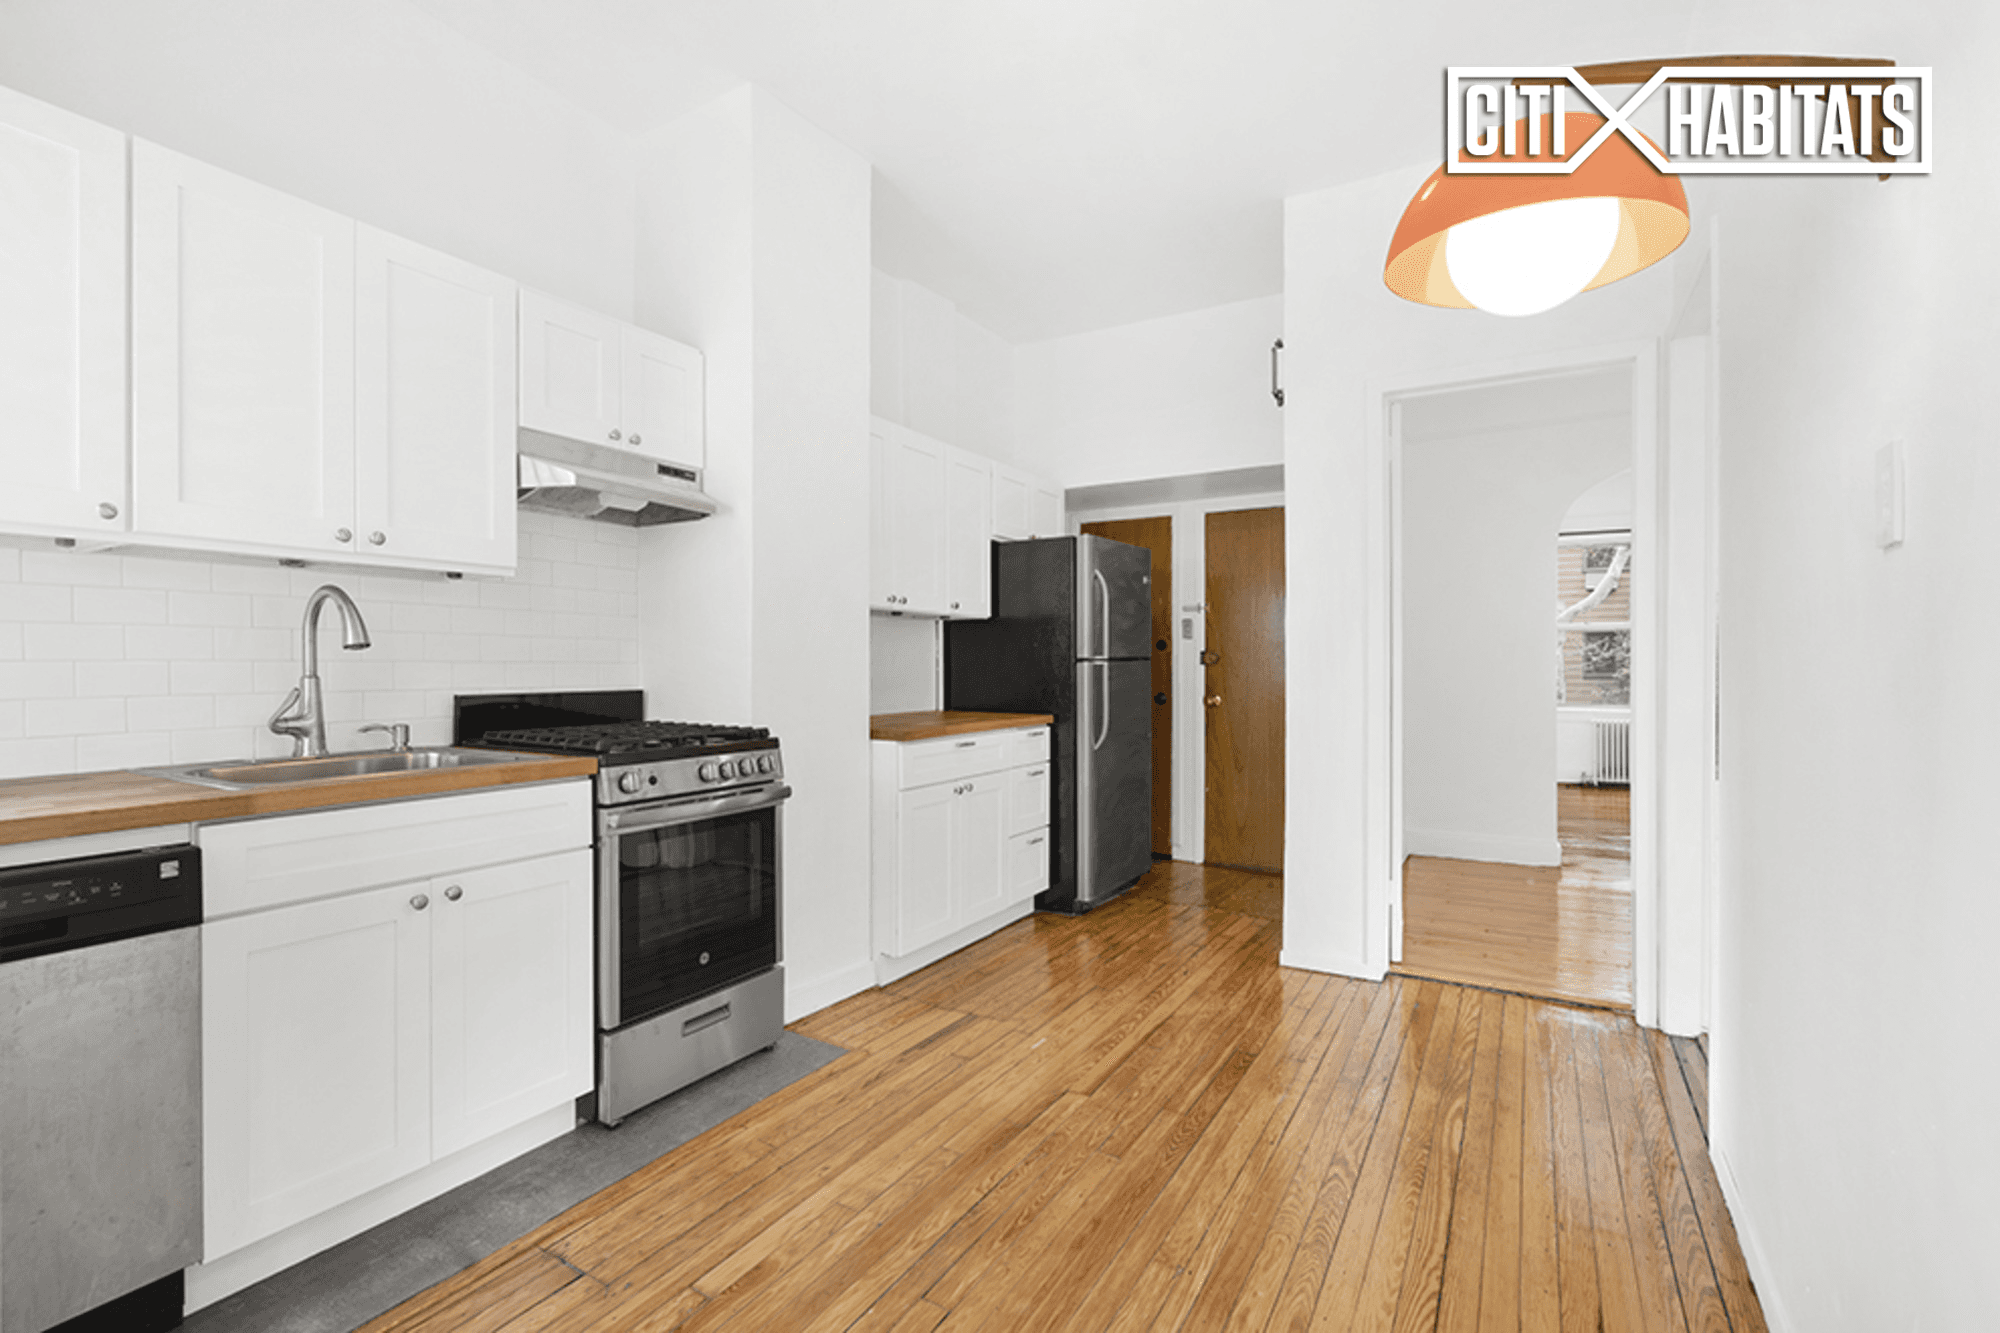 Massive 2. 5 bedroom apartment for rent in Williamsburg, Brooklyn 1st bedroom is massive with two connecting rooms.